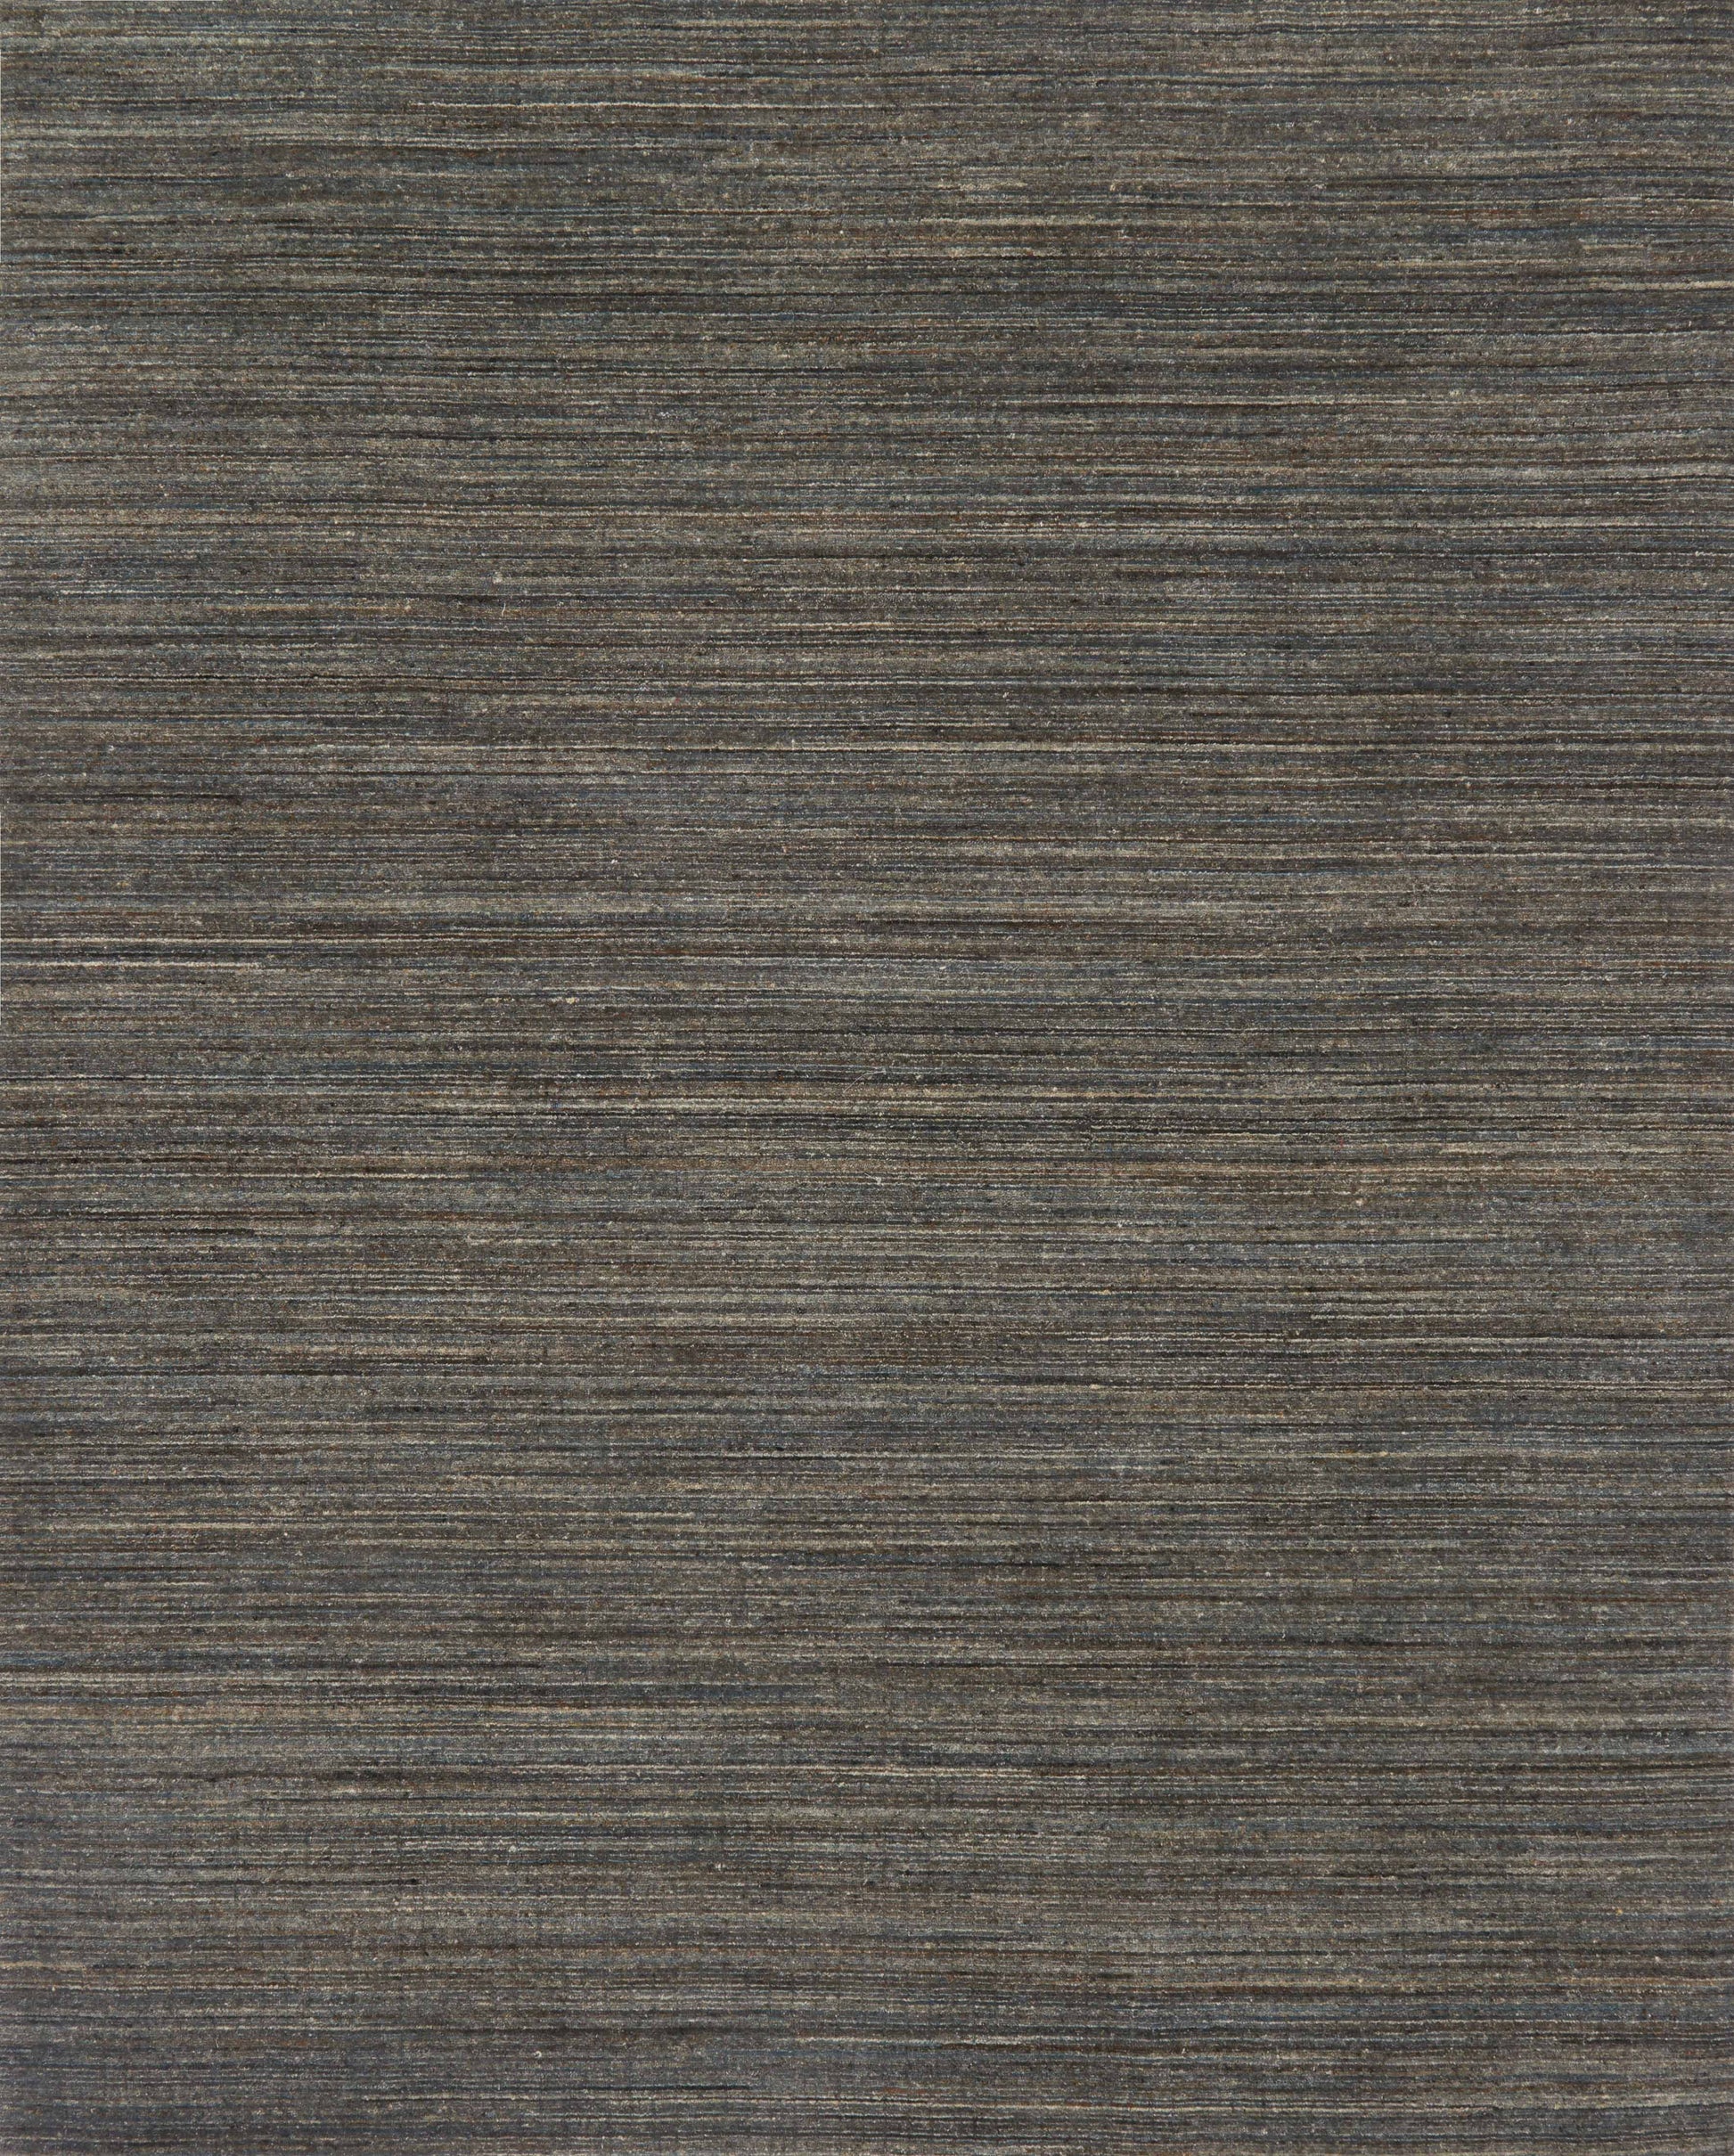 A picture of Loloi's Vaughn rug, in style VG-01, color Slate